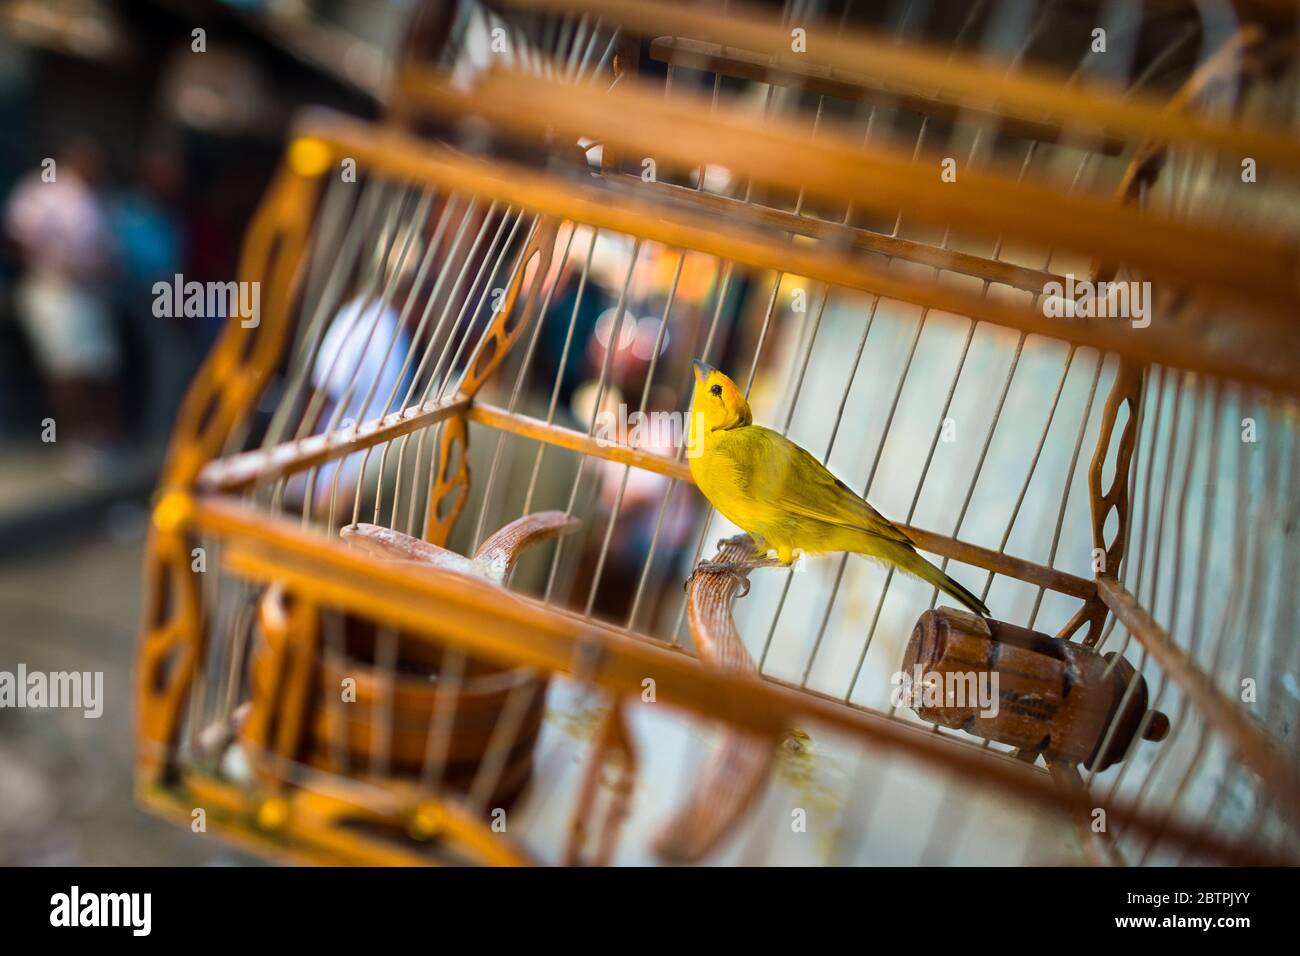 A pet bird (a canary) is seen inside a birdcage hung in the bird market in Cartagena, Colombia. Stock Photo